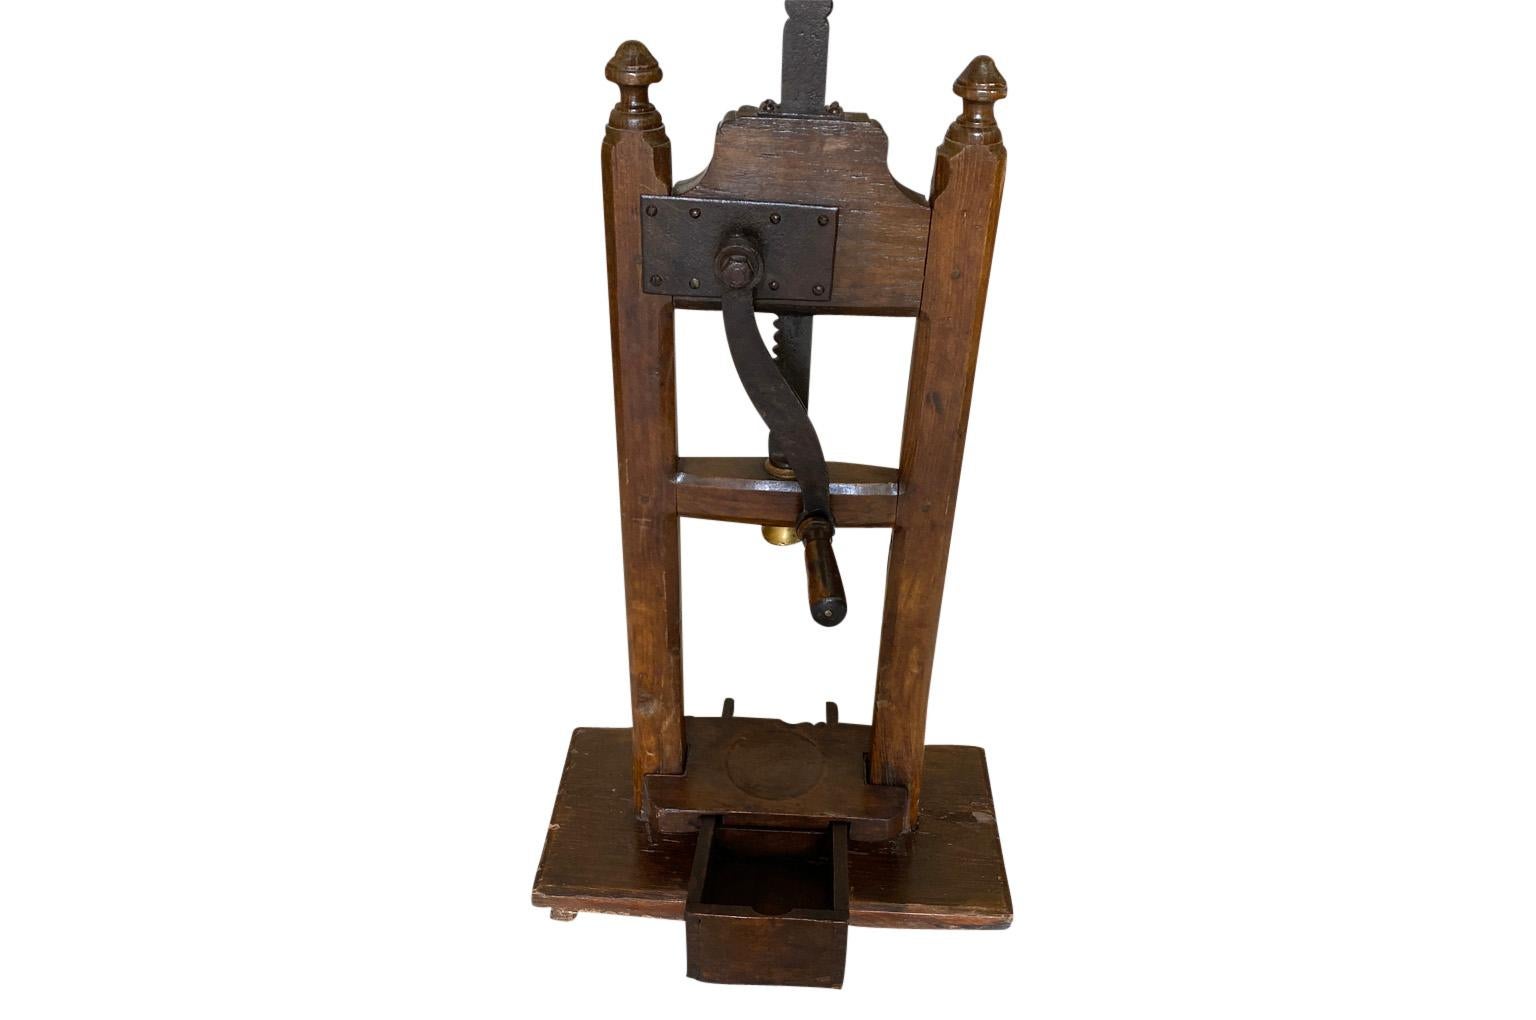 A charming 19th century wine bottle corking machine from the Tuscany region of Italy in wood and iron. A perfect accessory for any wine cellar of kitchen.